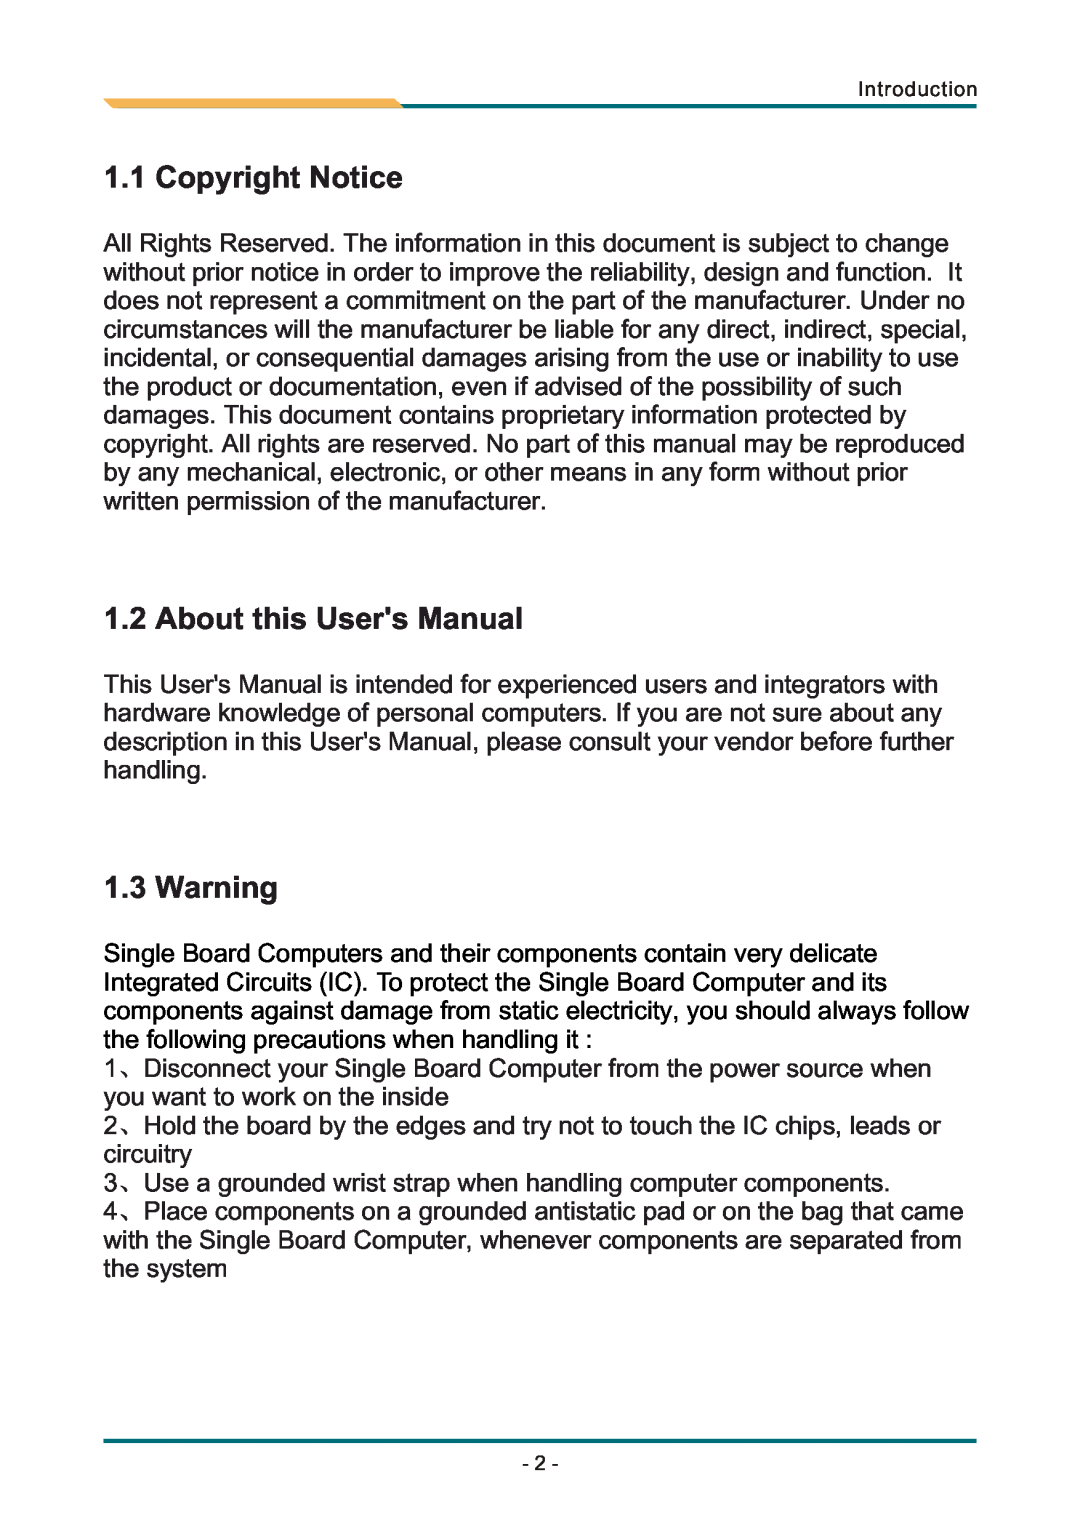 AMD SBX-5363 manual Copyright Notice, About this Users Manual, Warning 